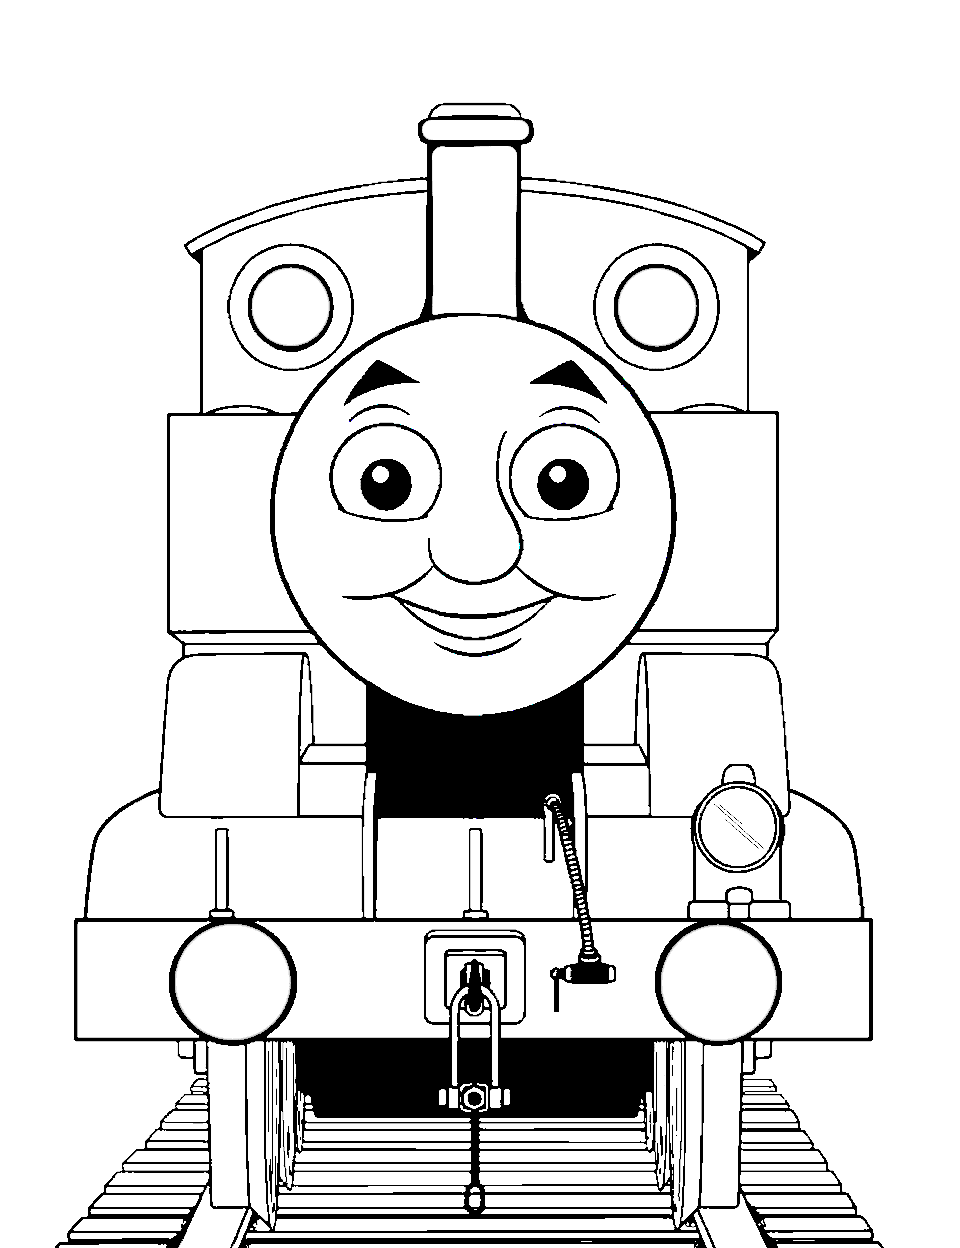 Thomas the Tank Engine Coloring Page - Thomas, a blue steam locomotive, smiling on the tracks.